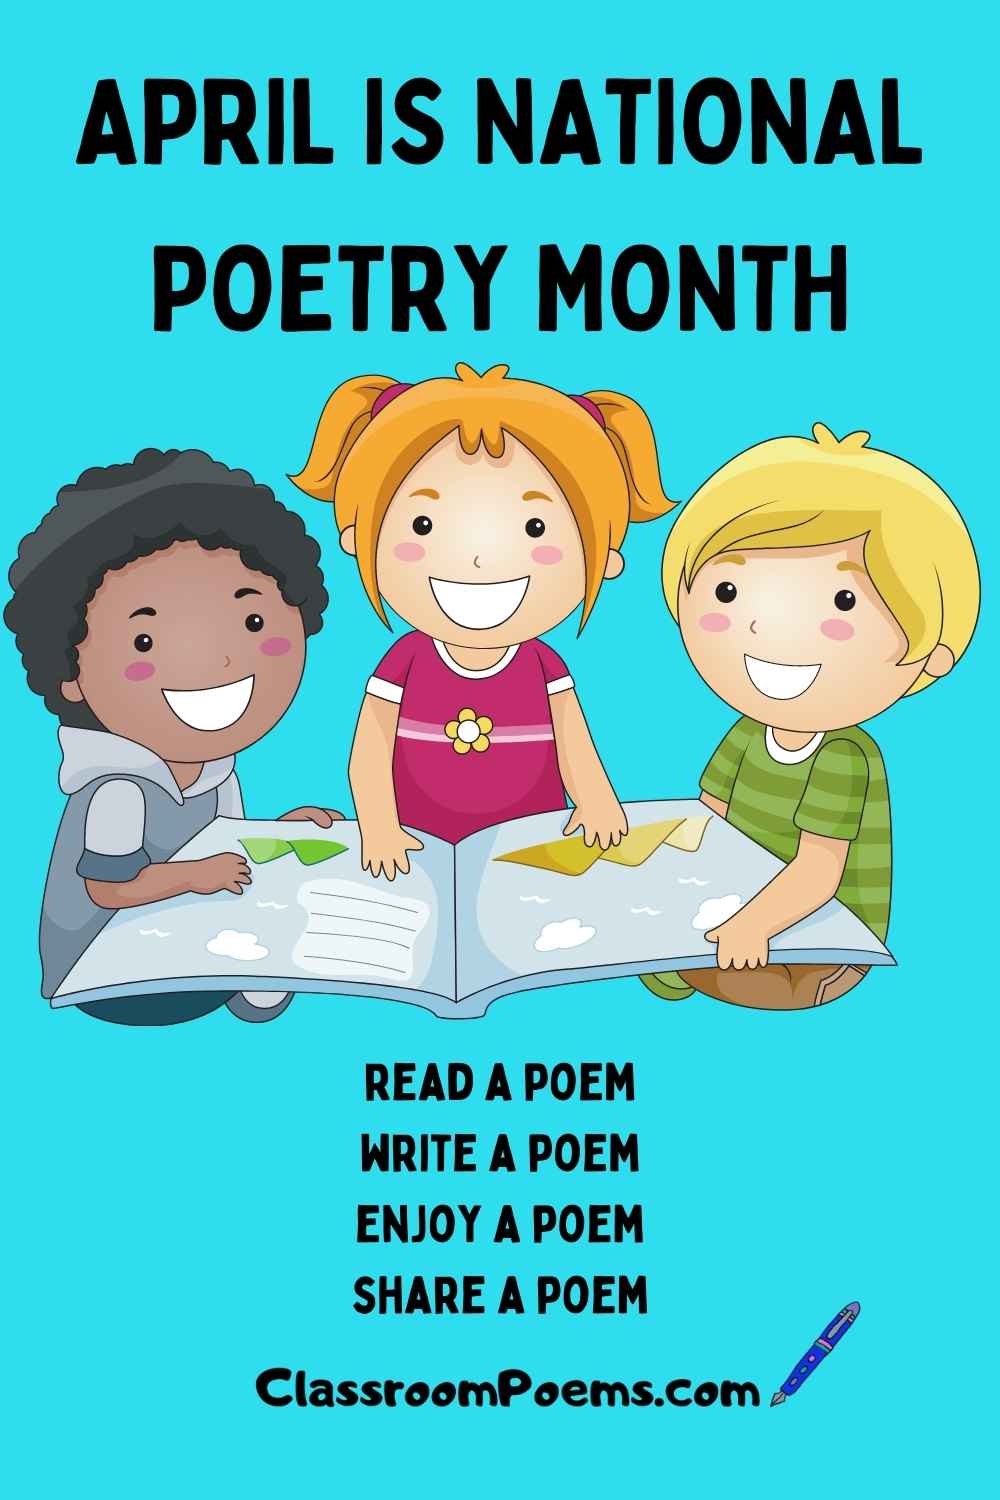 April is Poetry Month, Read a poem for poetry month, national poetry month, classroompoems.com